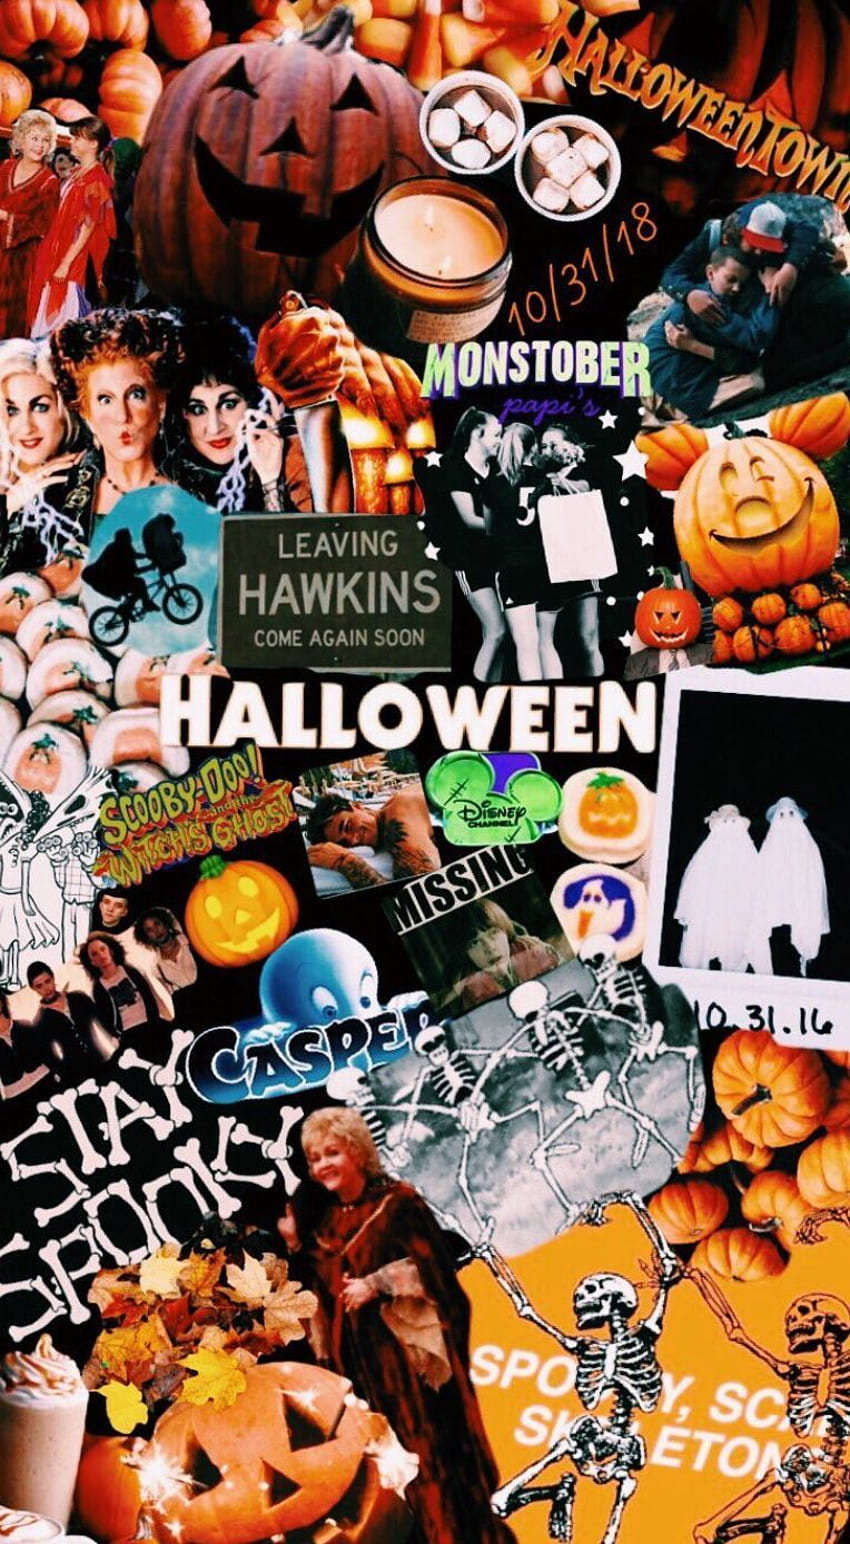 29 Free Halloween Wallpapers For iPhone HD Quality  honestlybecca  Free halloween  wallpaper Halloween wallpaper Halloween wallpaper backgrounds